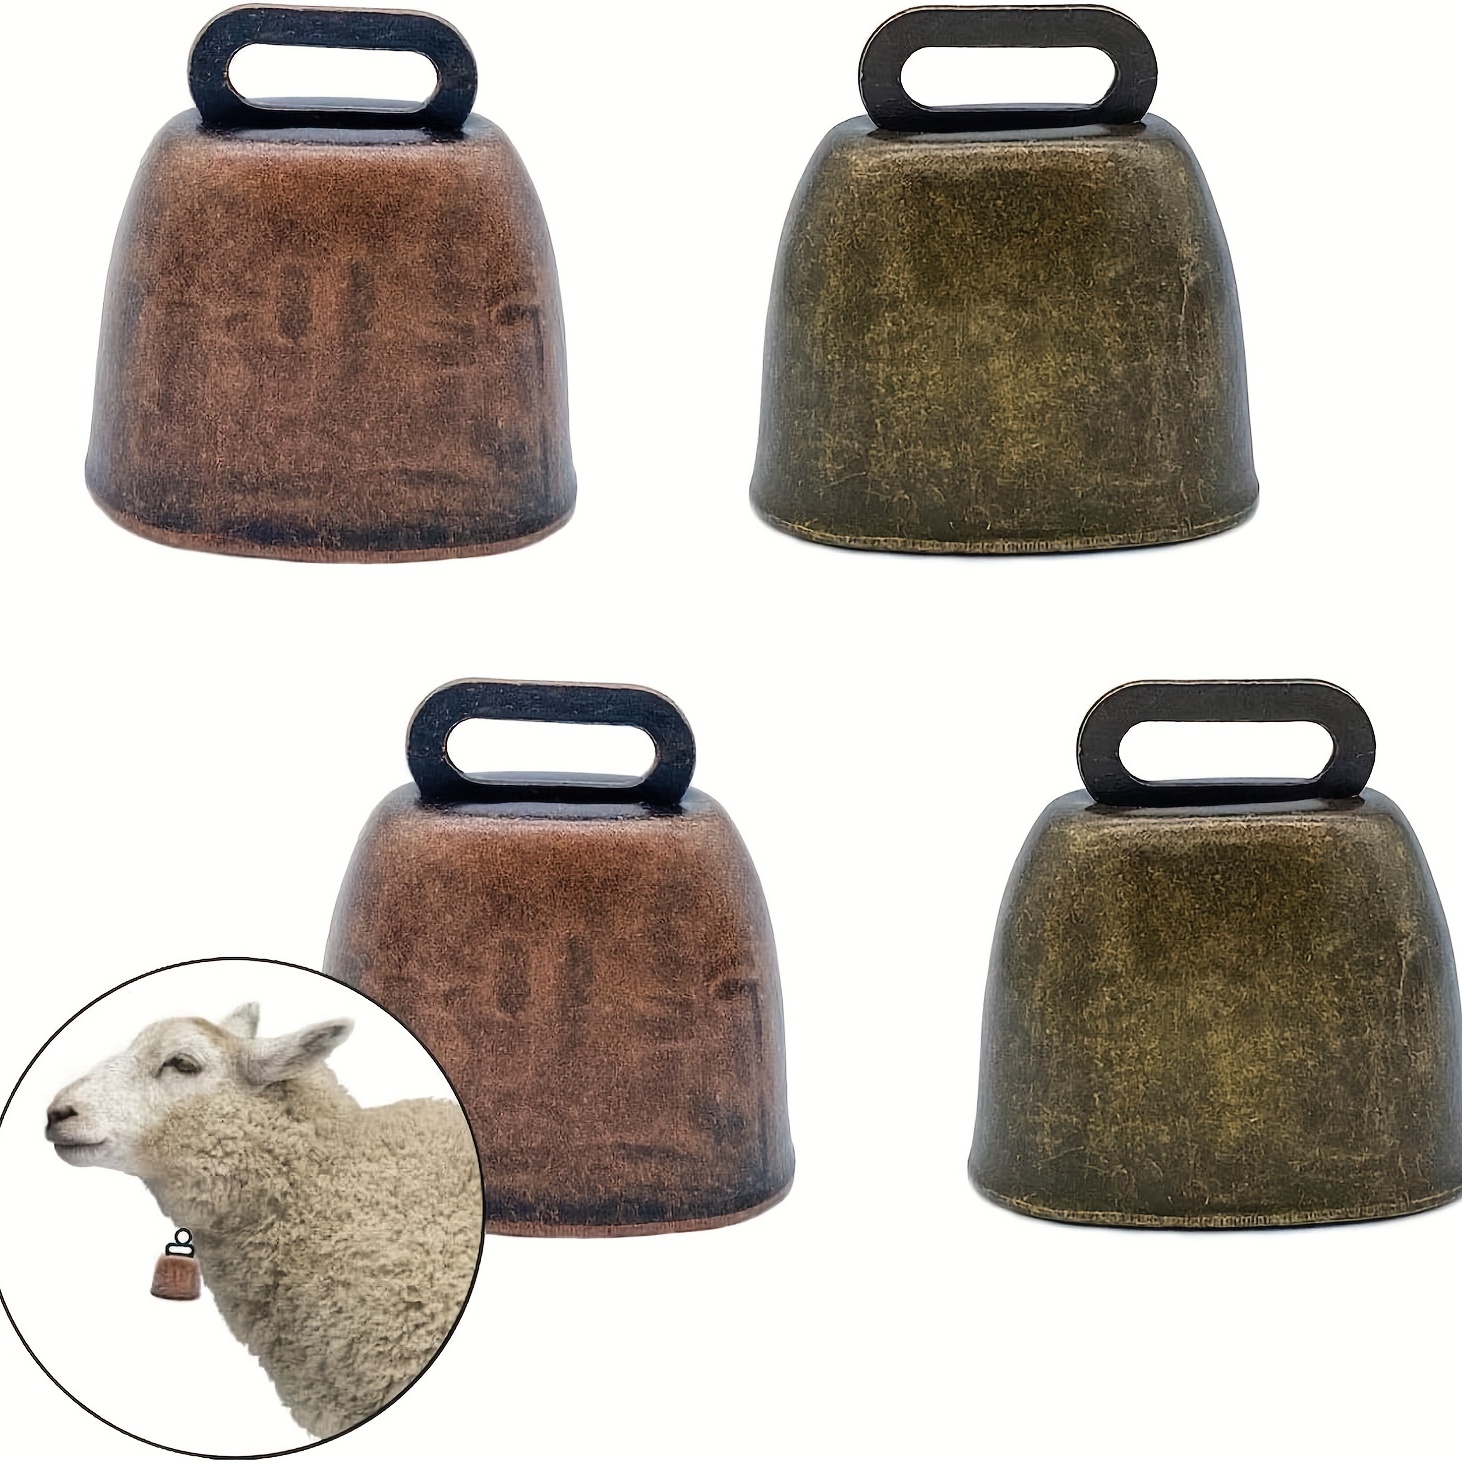 6 Pcs Metal Cow , Cowbell Retro For Horse Sheep Grazing Copper, Cow Bells  Noise Makers